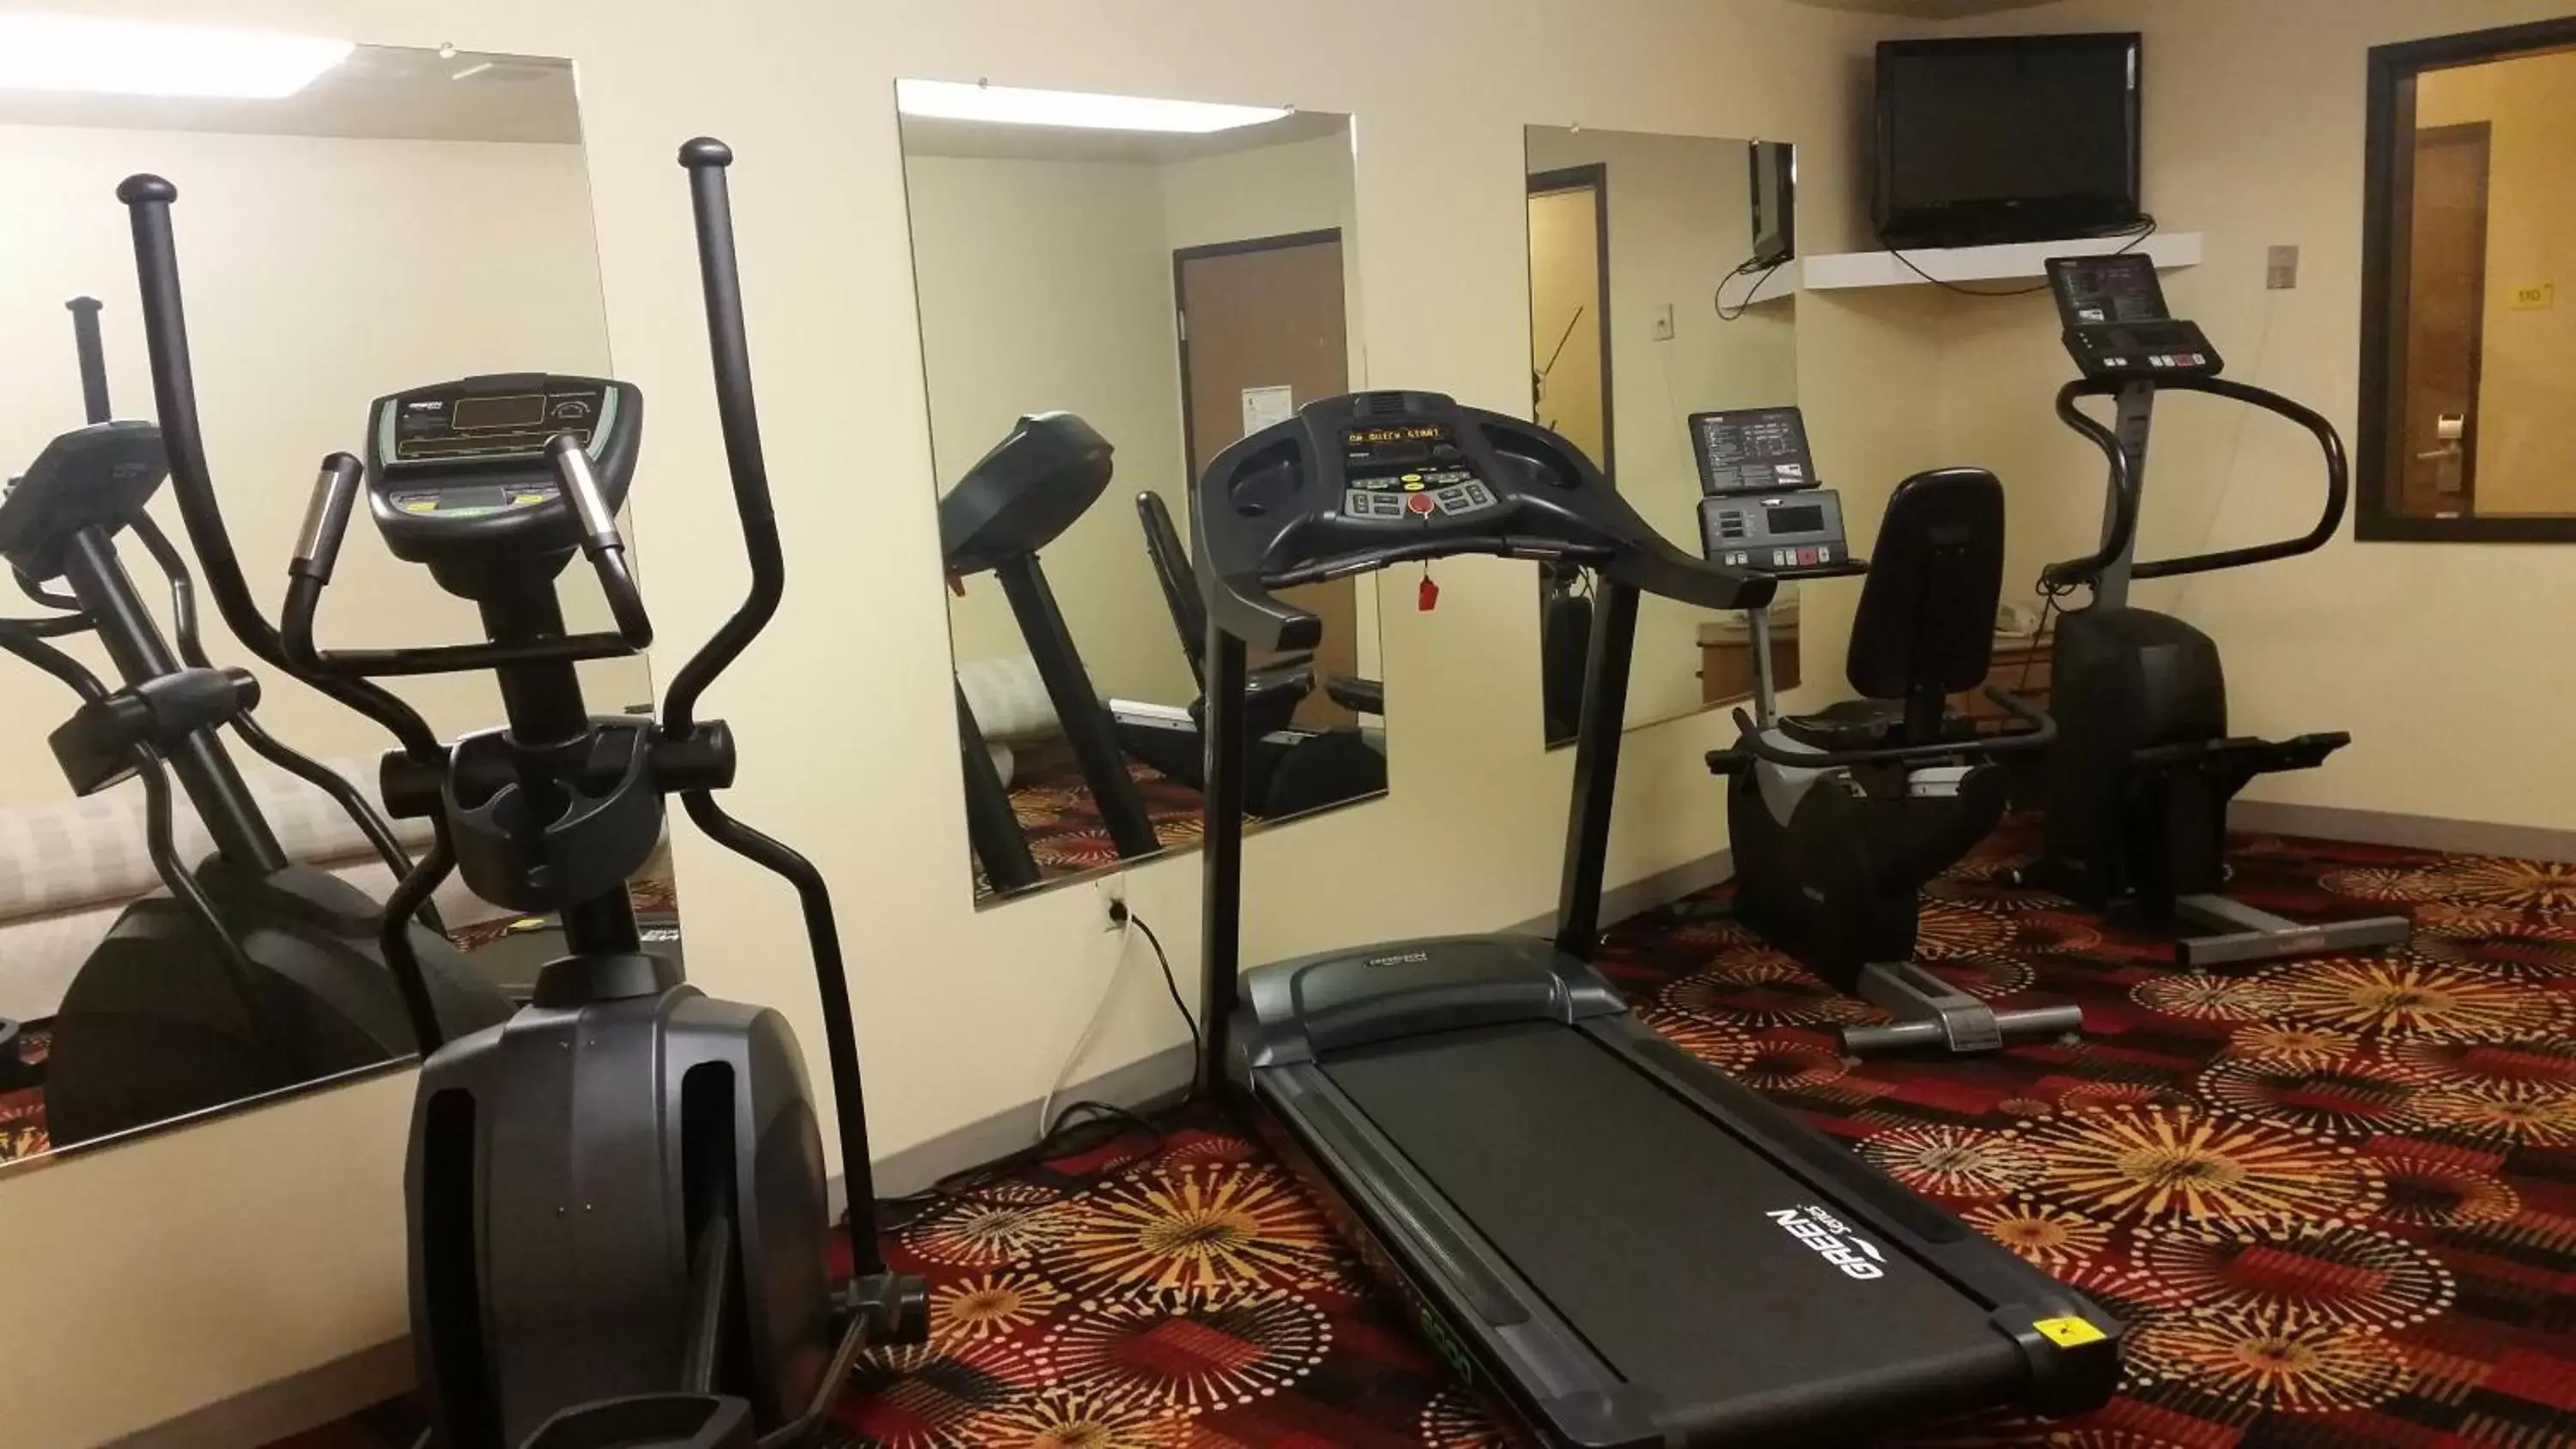 Fitness centre/facilities, Fitness Center/Facilities in Super 8 by Wyndham Wheeling St Clairsville OH Area